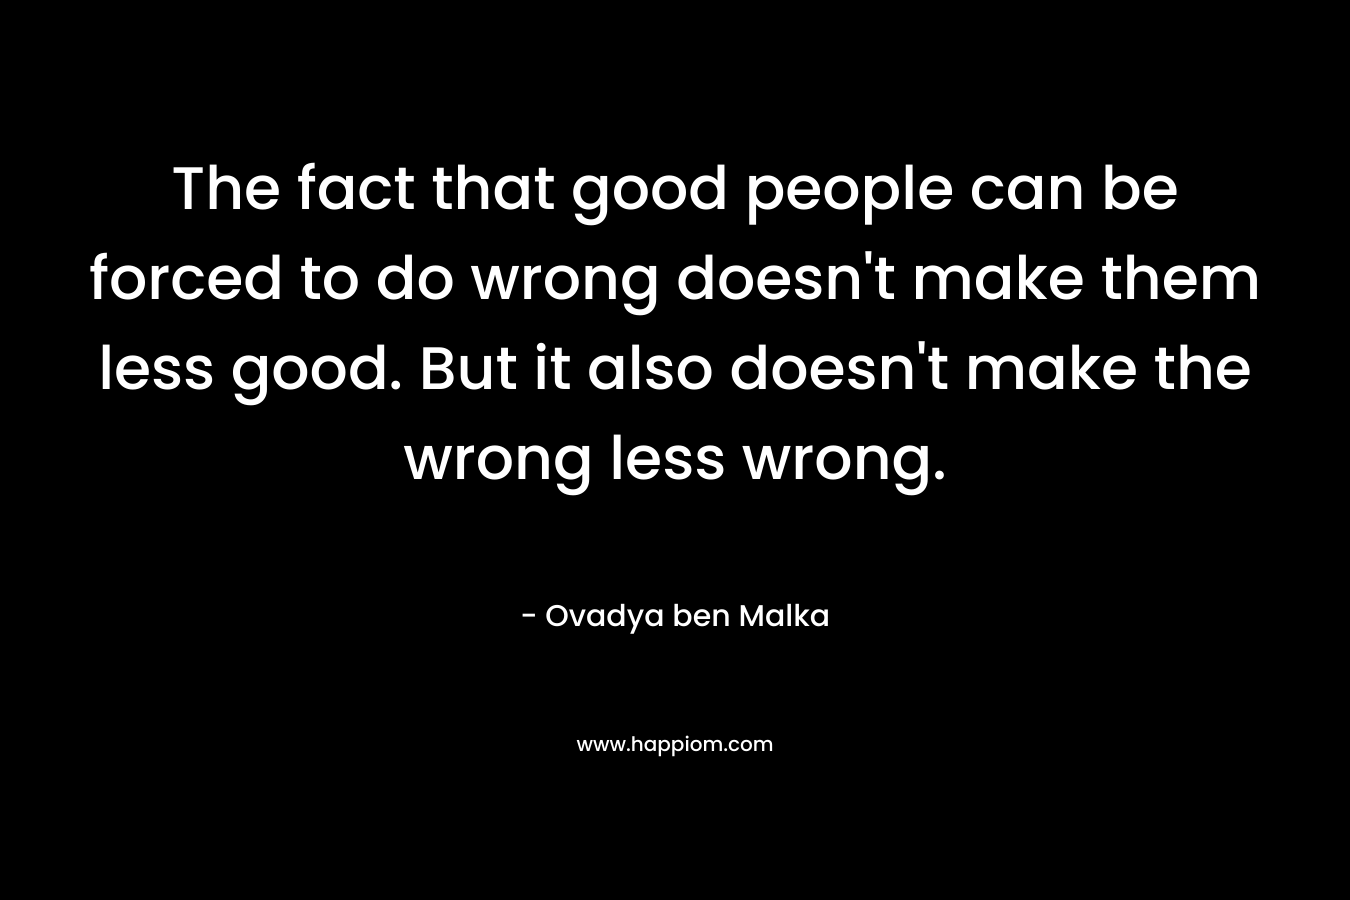 The fact that good people can be forced to do wrong doesn't make them less good. But it also doesn't make the wrong less wrong.